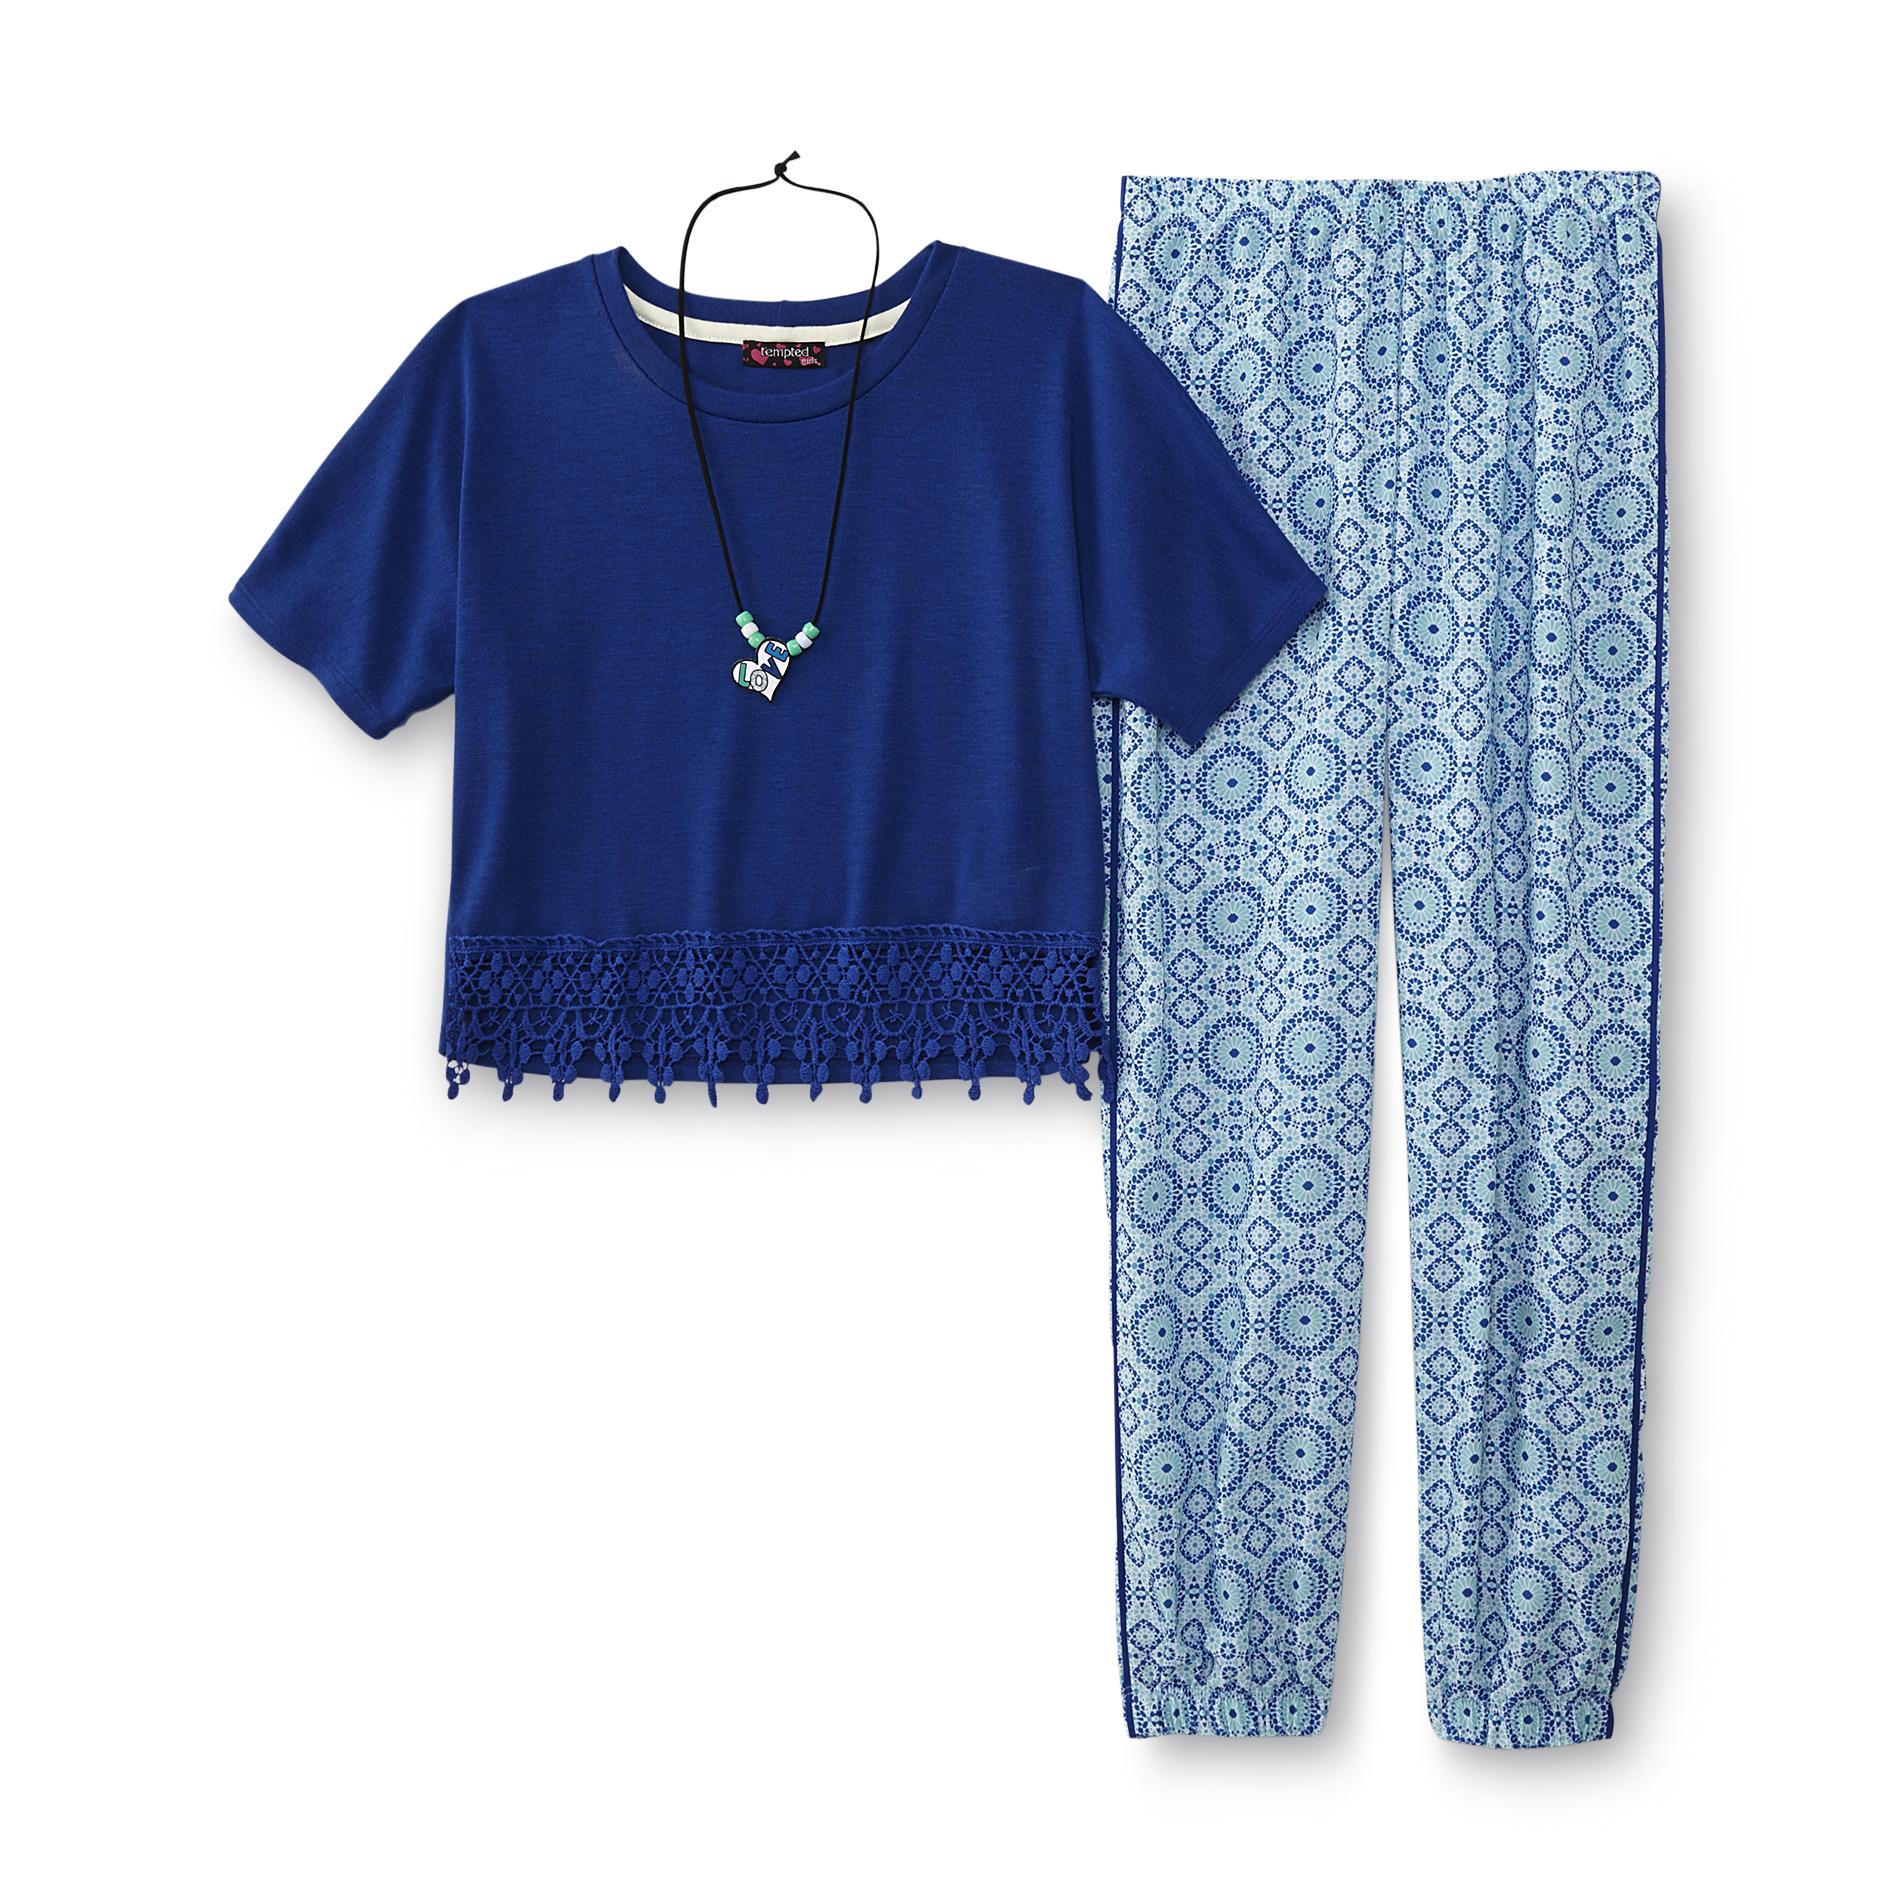 Girl's Top, Jogger Pants & Necklace - Medallion Print